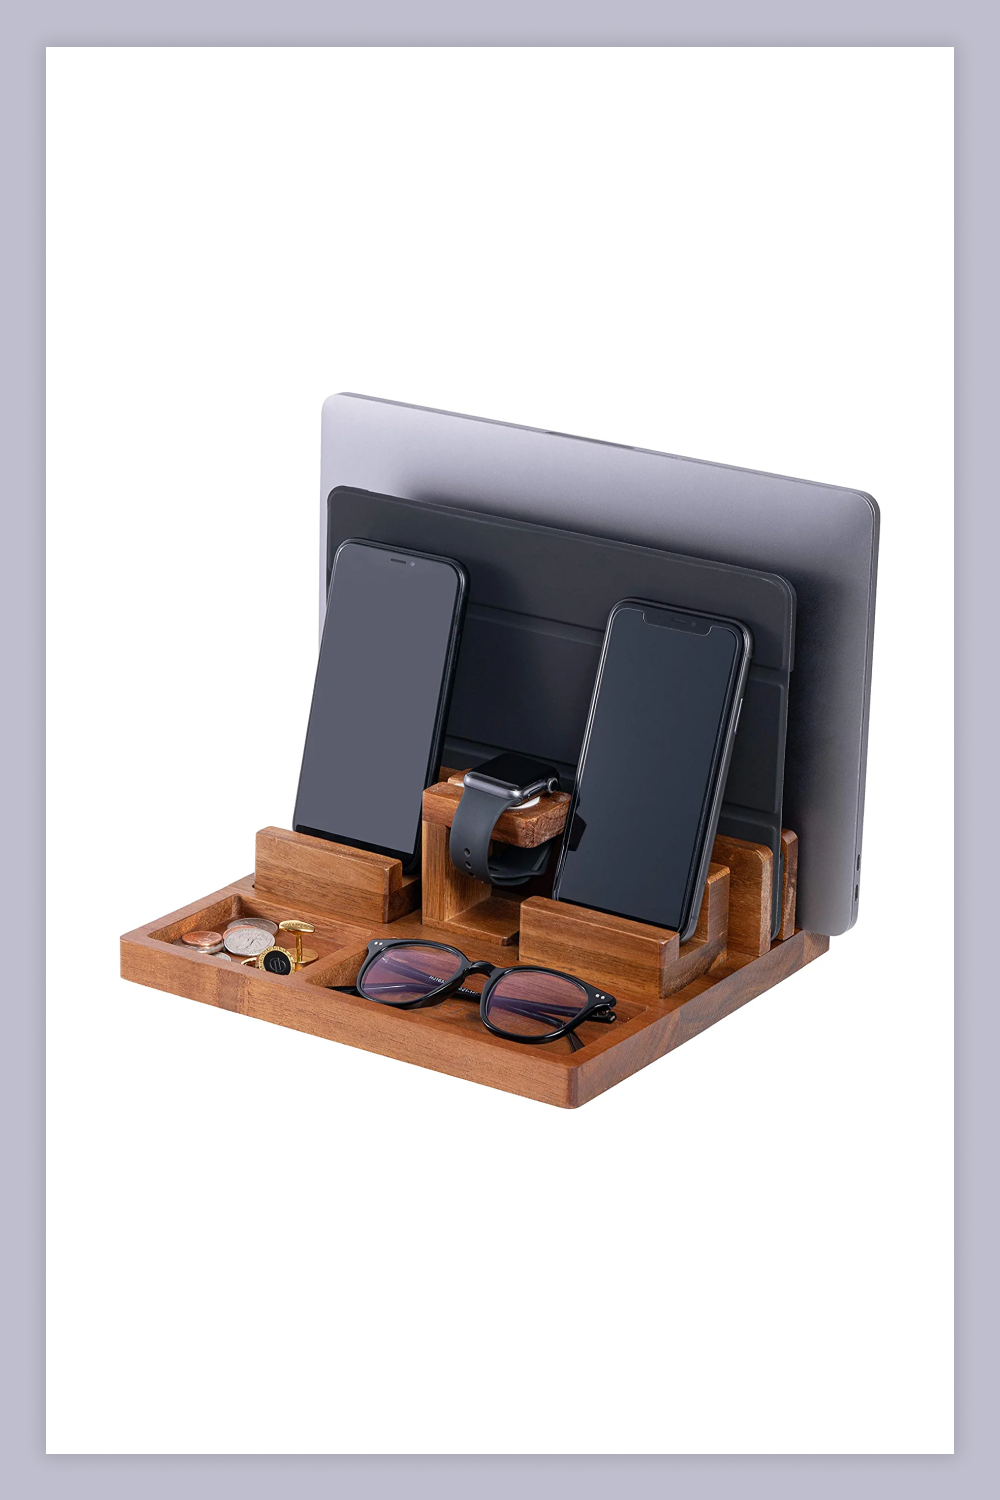 WUTCRFT - Wood Charging Station/Nightstand Organizer for Multiple Devices.